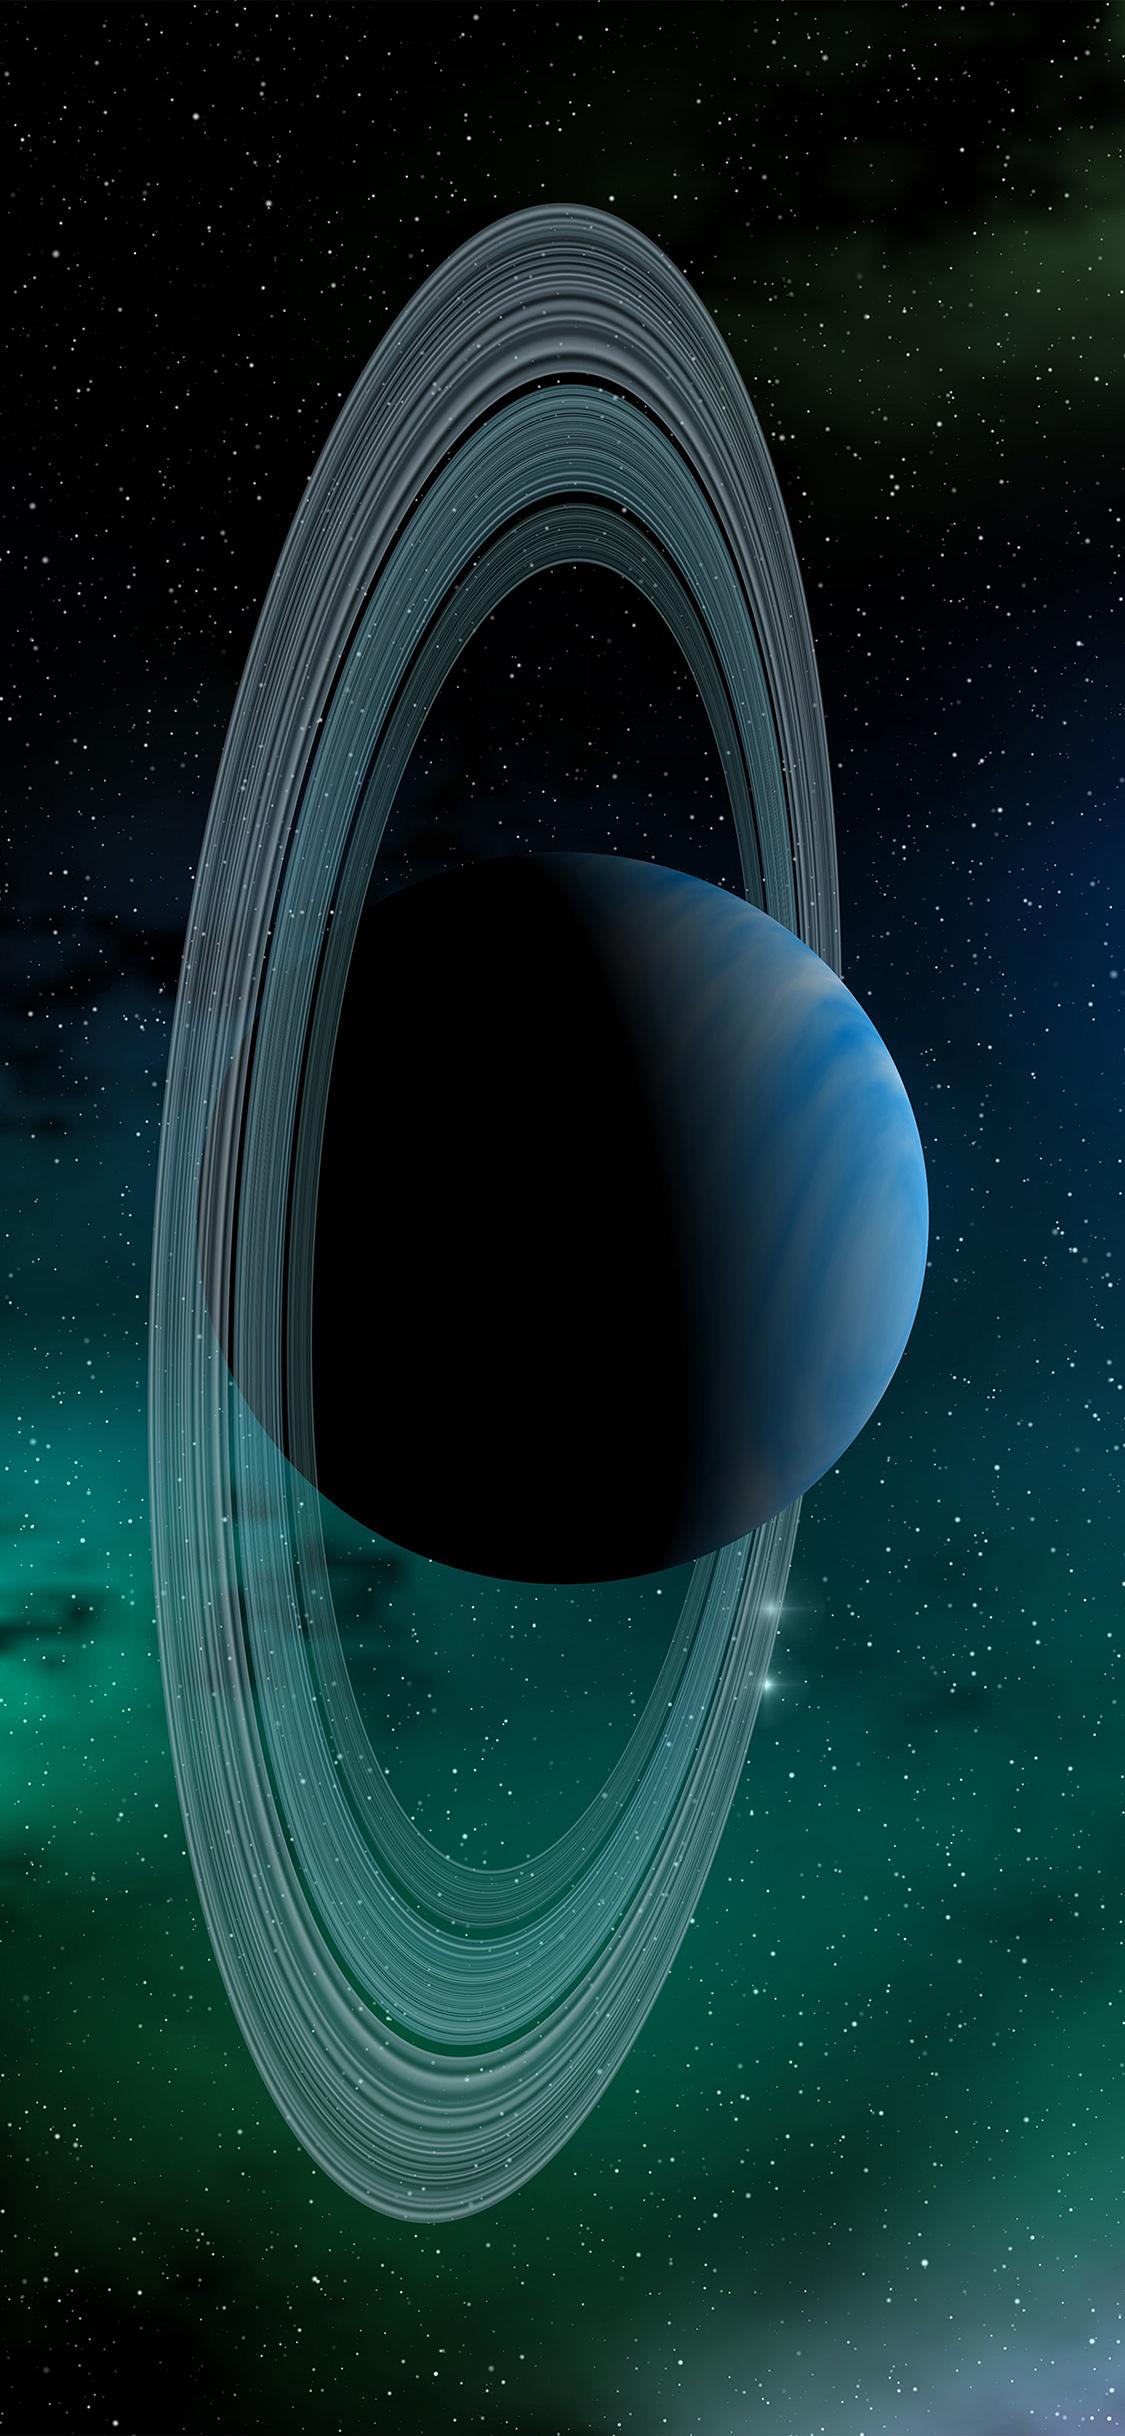 iPhone X wallpaper. space planet